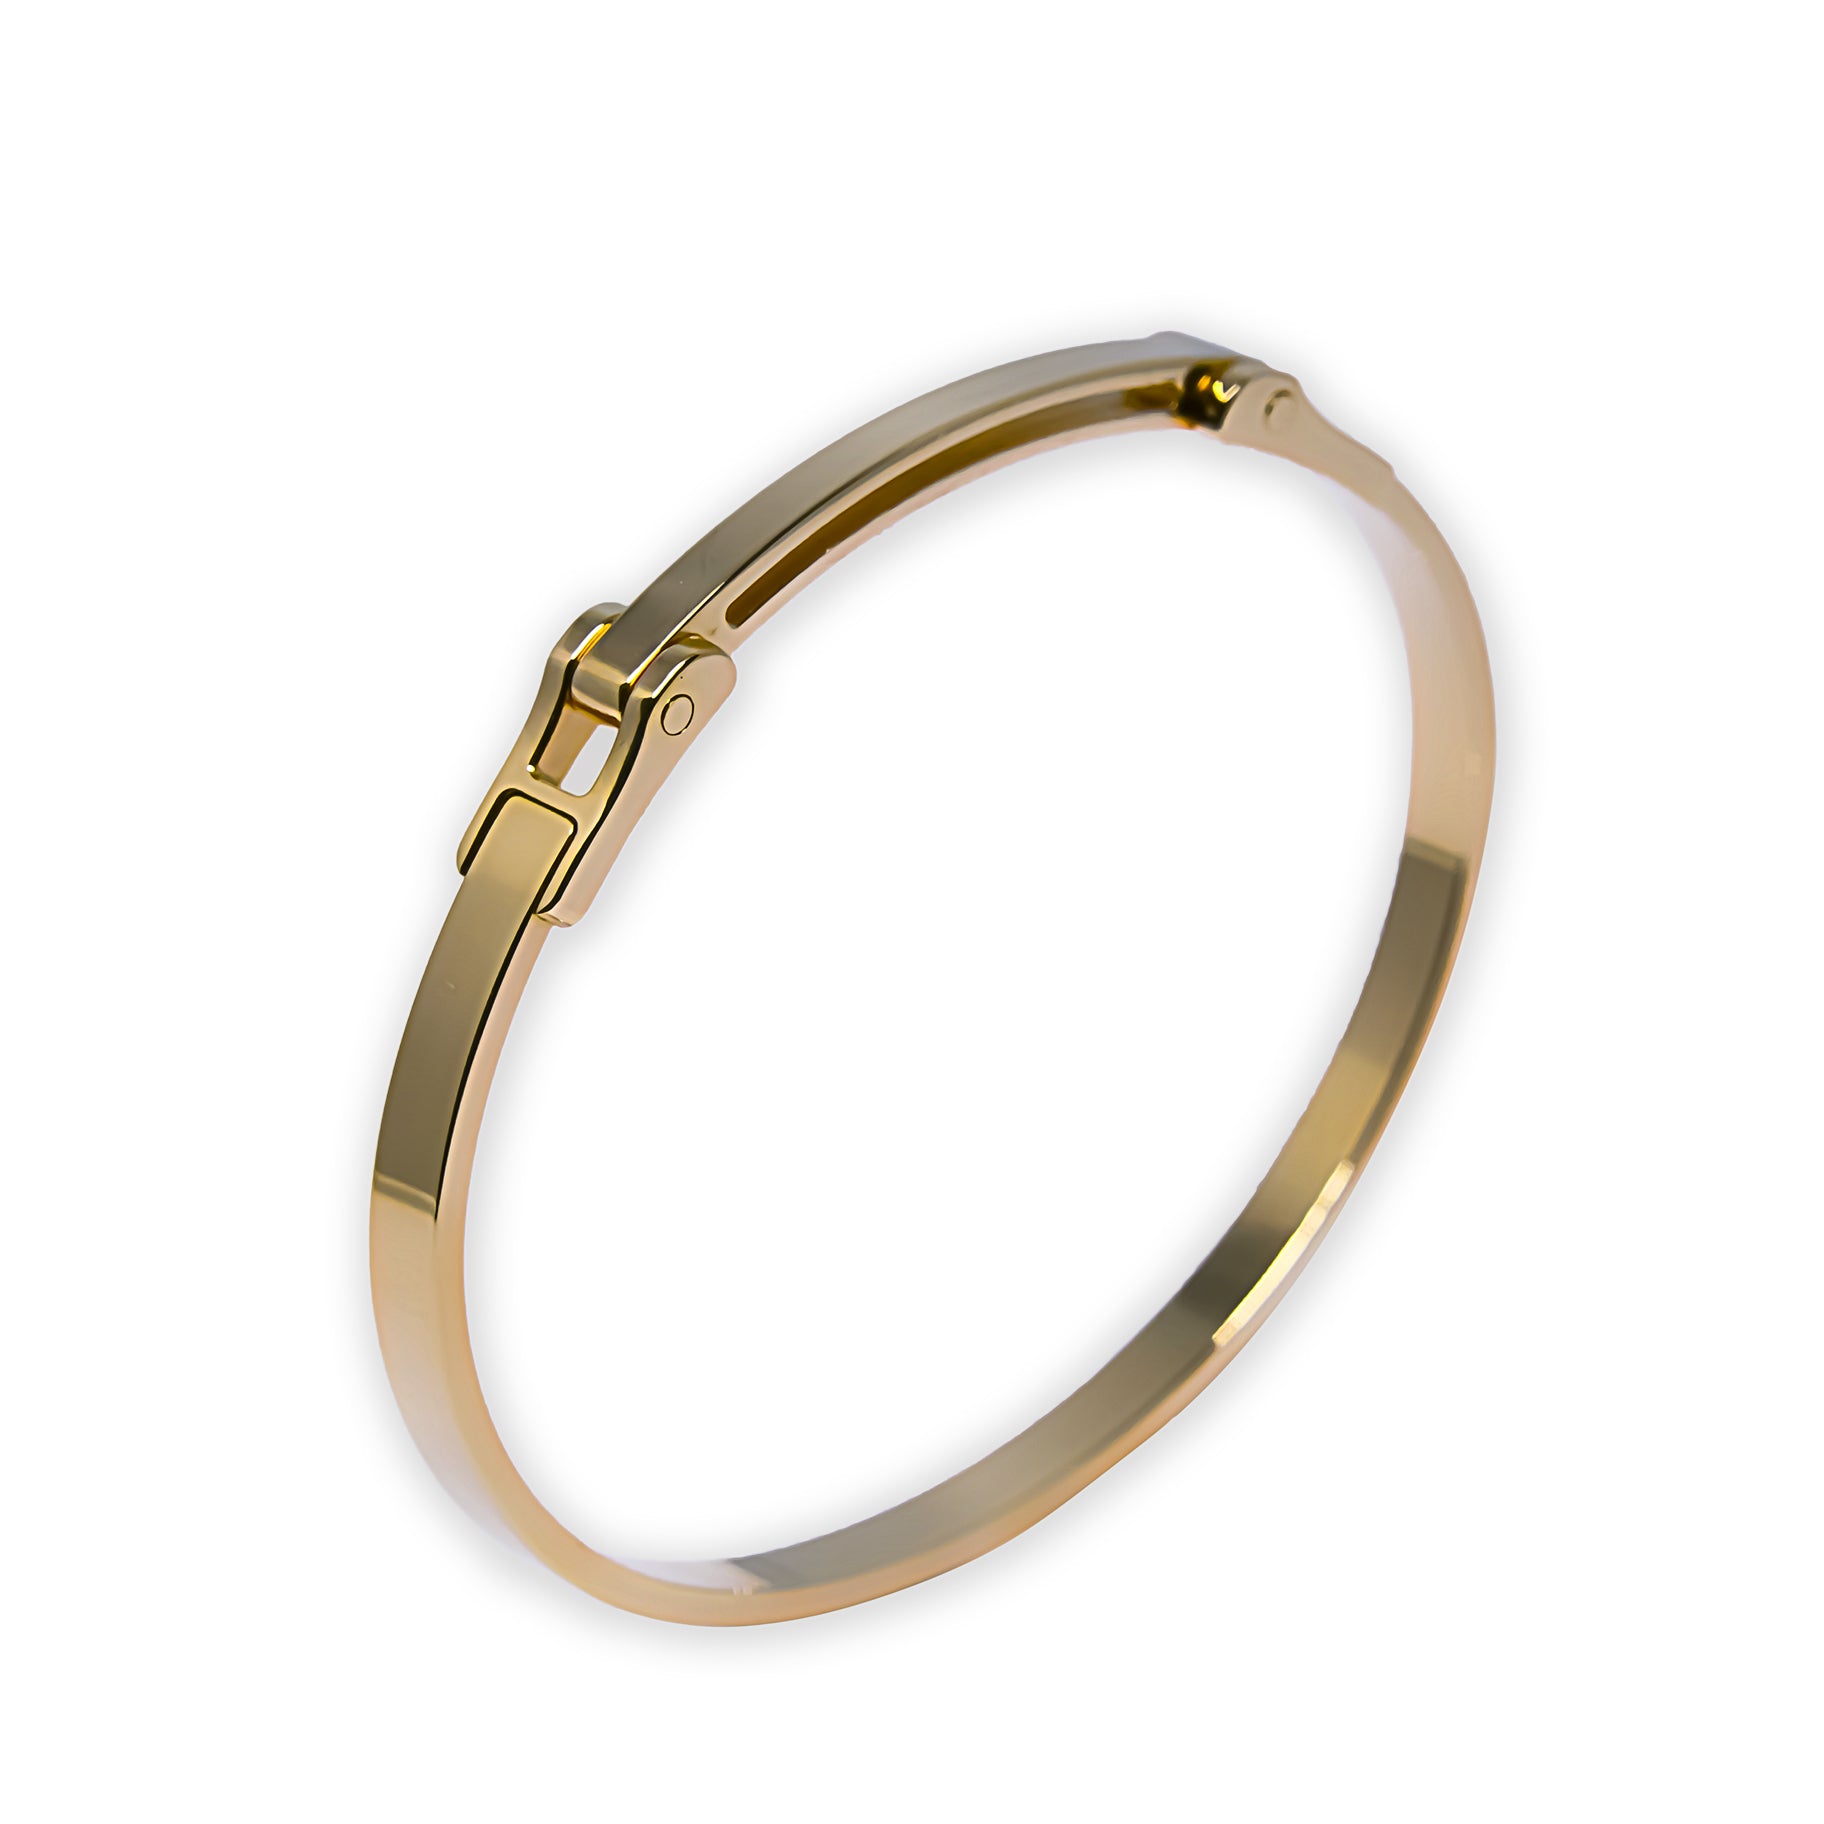 Bracelet EARTH IS ROUND 4mm with hinge yellow gold 18k 750